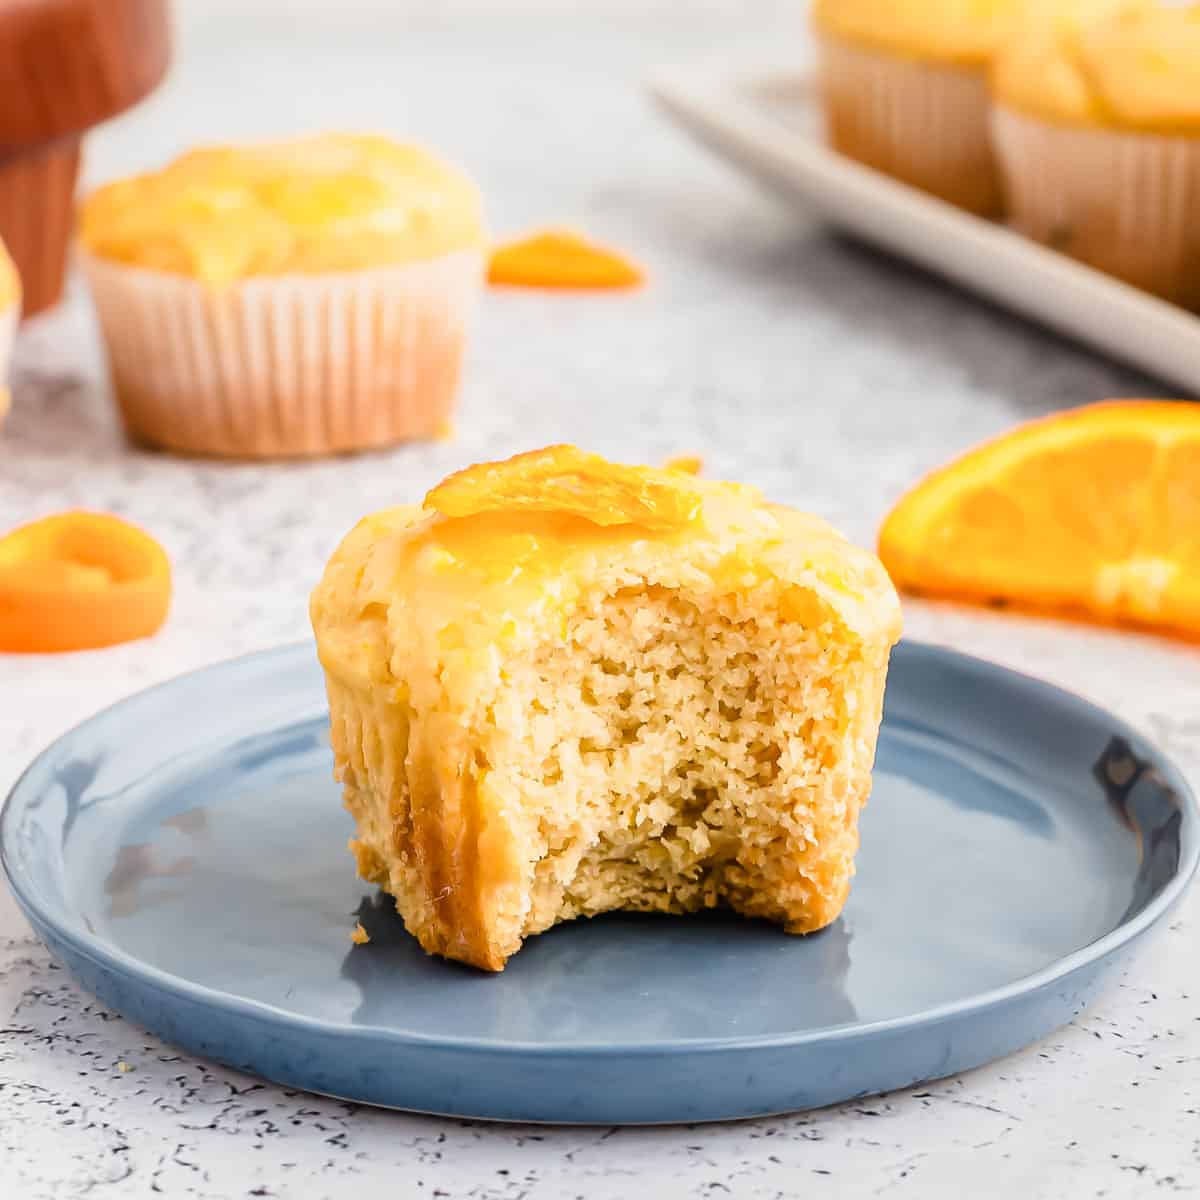 An orange muffin on a blue plate with a bite taken out of it.